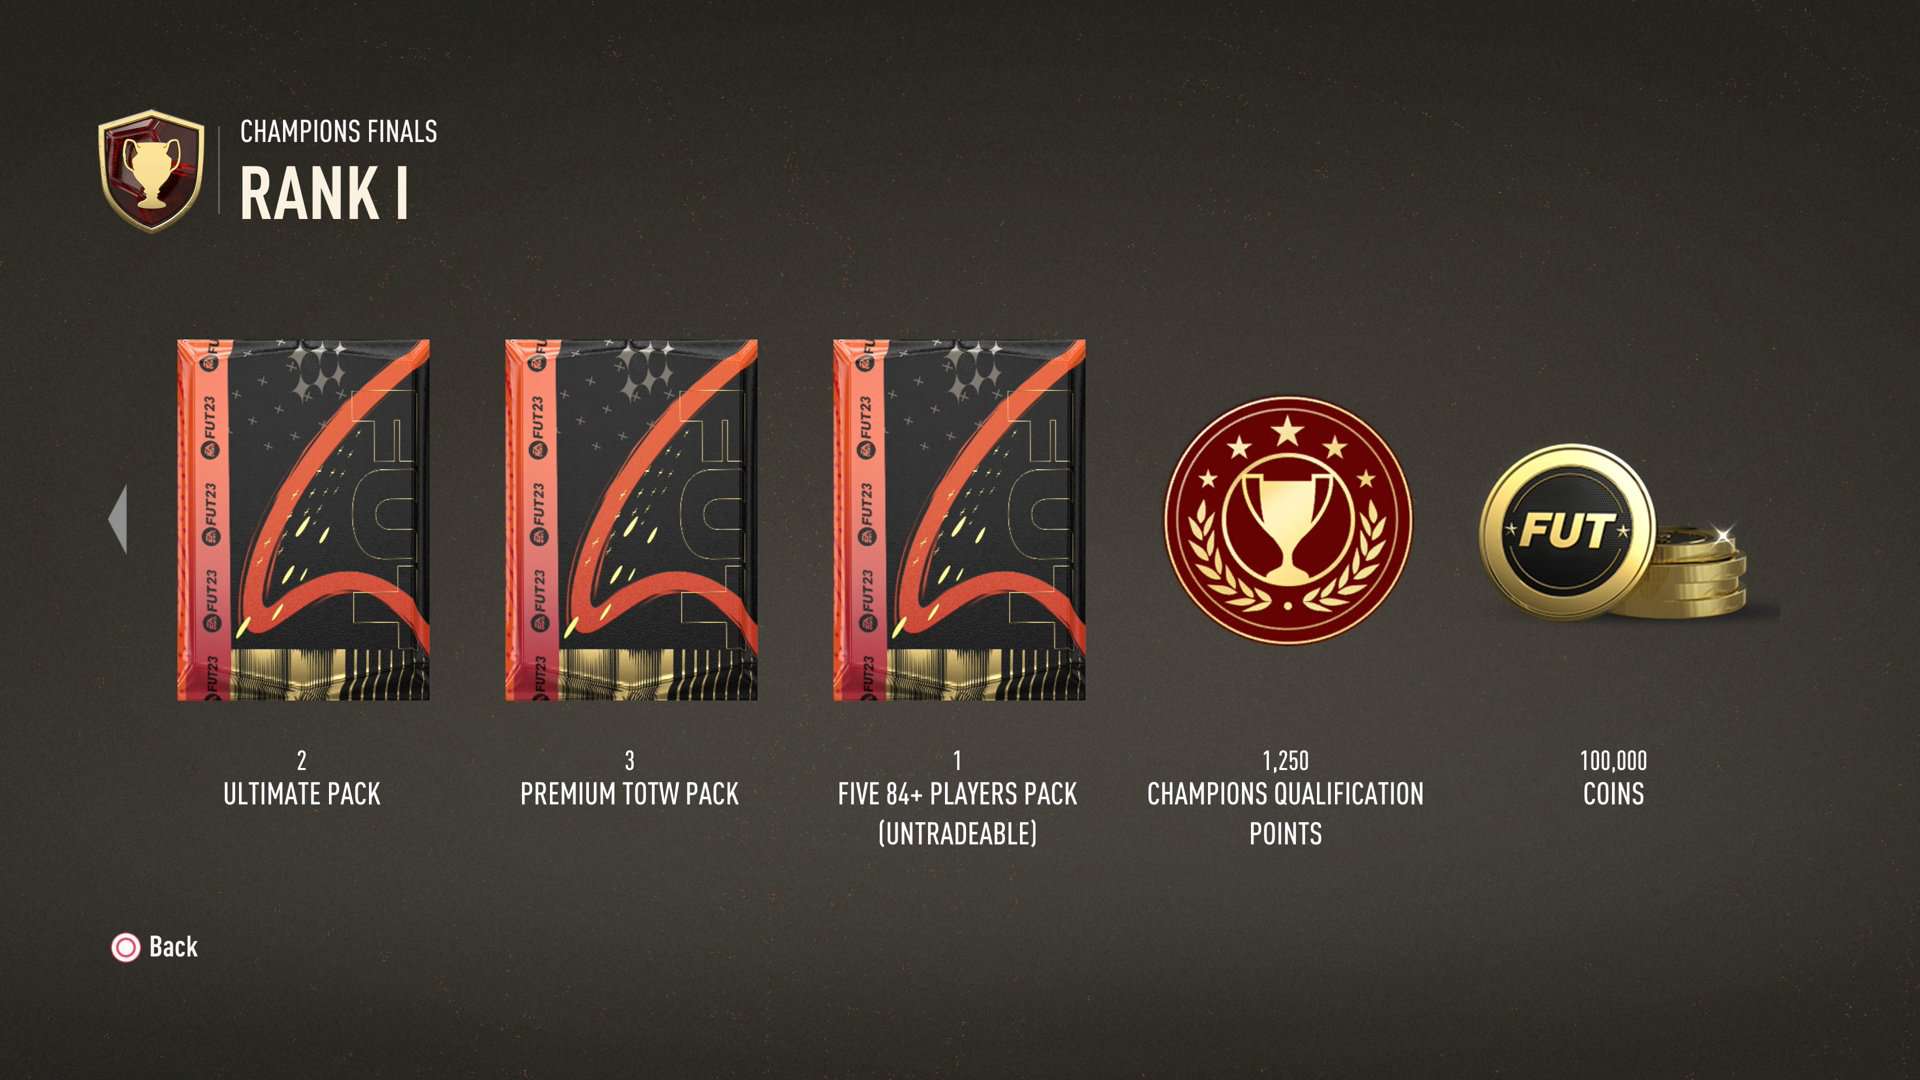 FIFA 23 FUT Champions Weekend League Rewards are increasing starting January 6th - UK